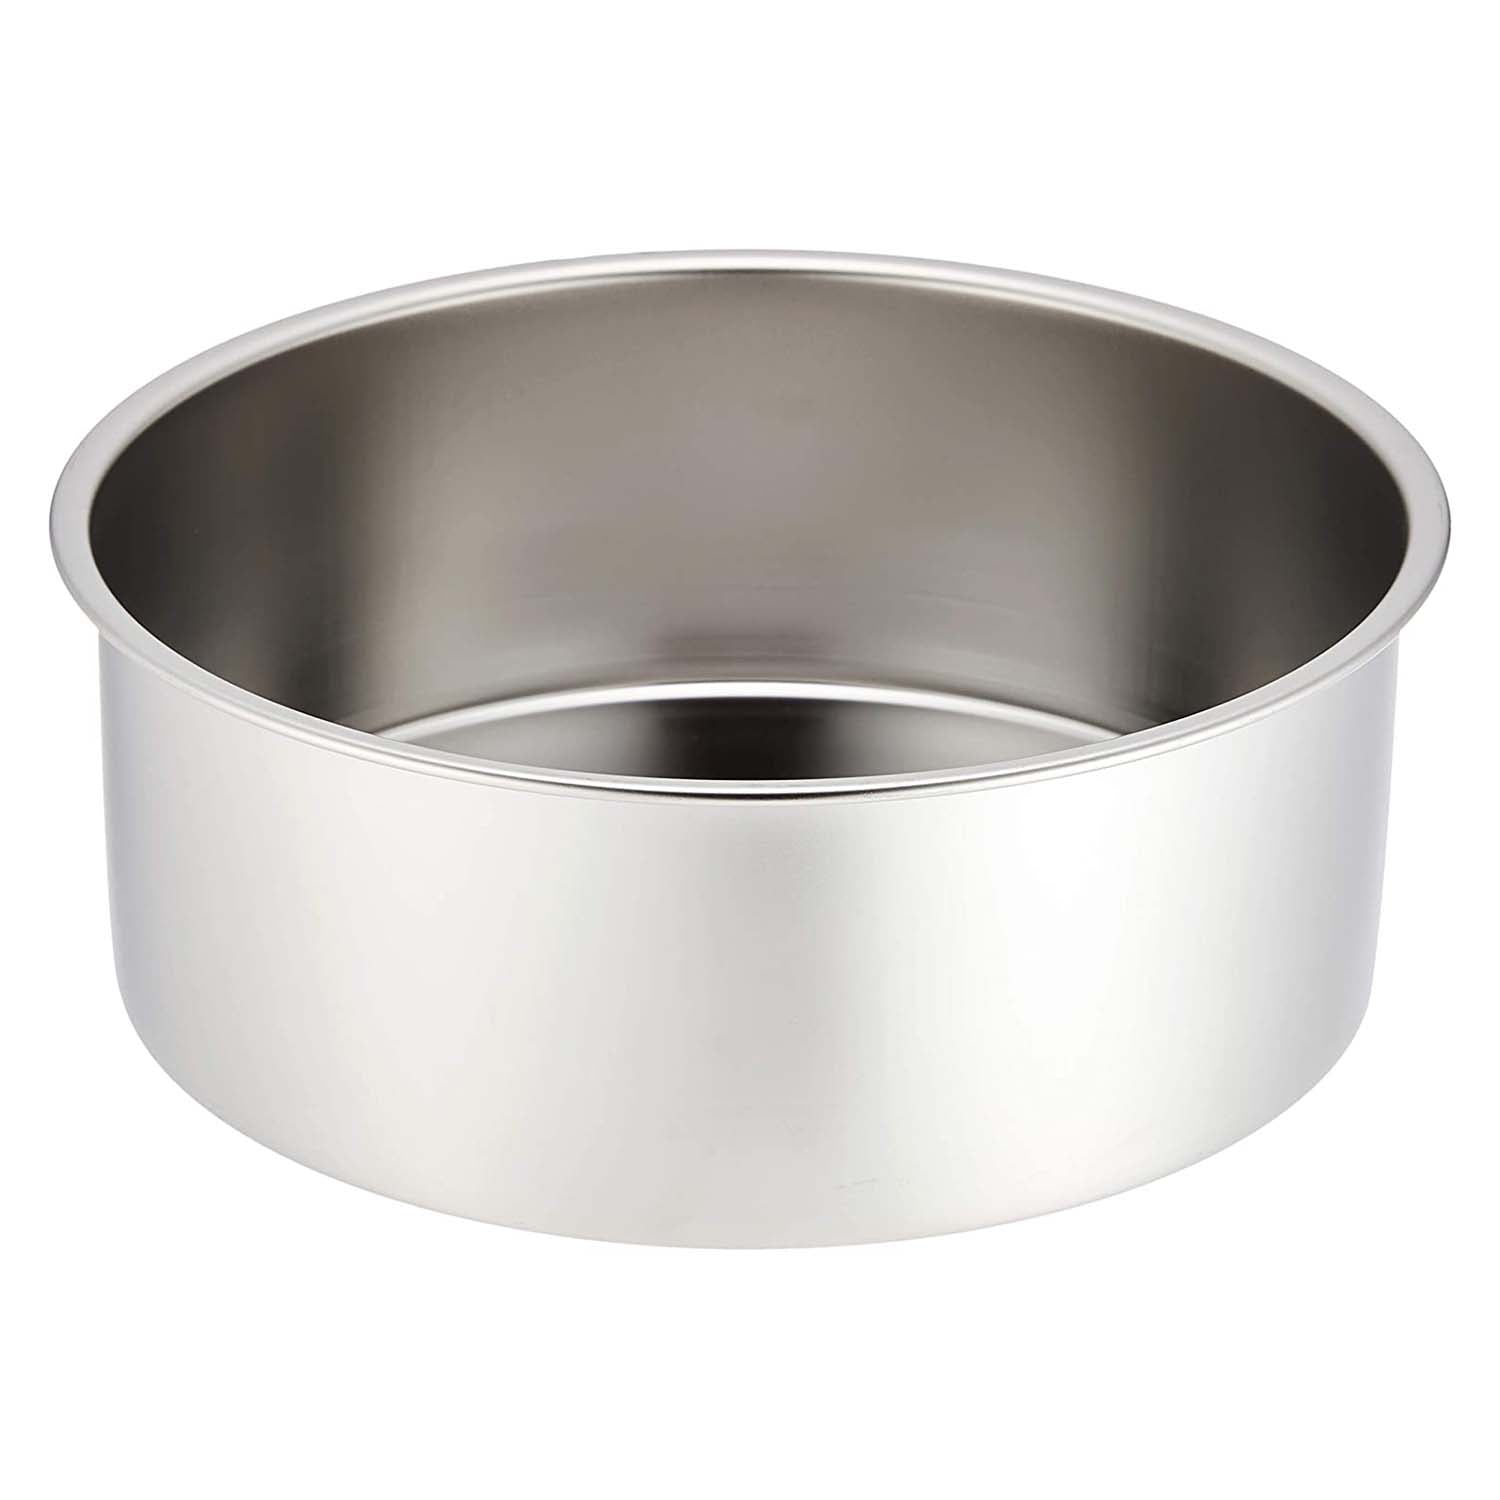 SHIMOTORI Stainless steel Round Cake Pan with Removable Bottom -  Globalkitchen Japan